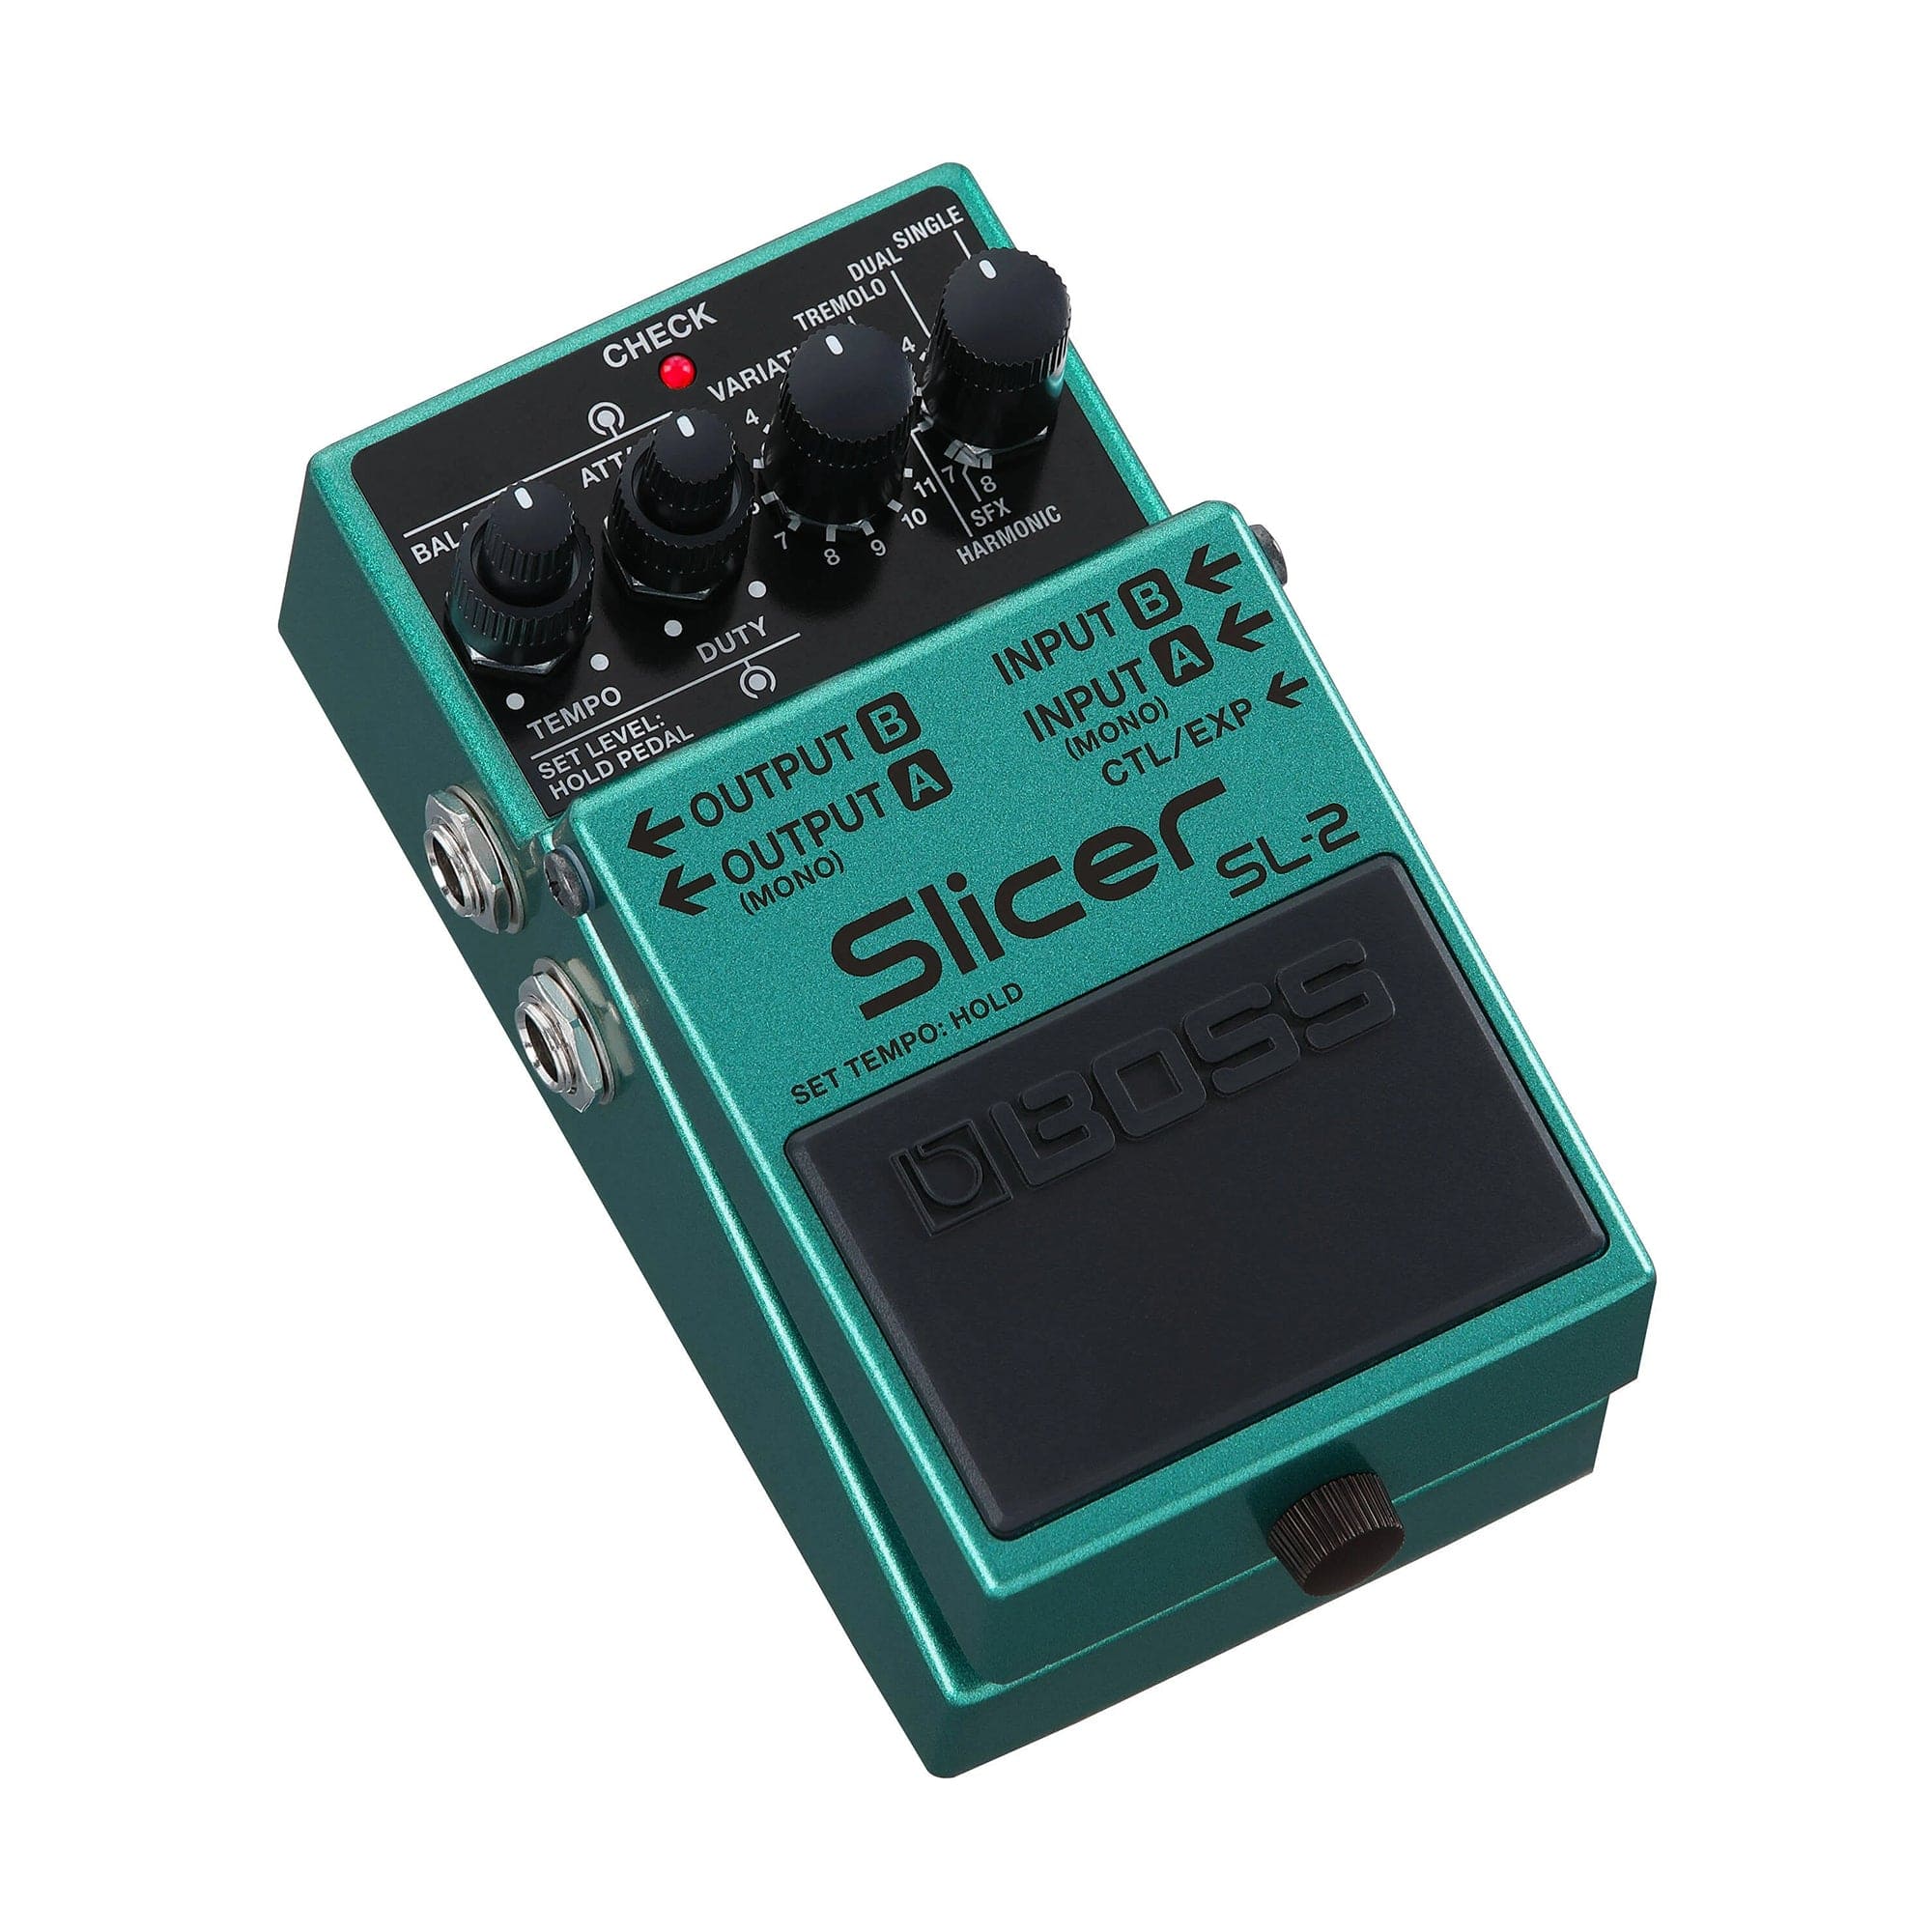 Boss SL-2 Slicer Pedal Effects and Pedals / Tremolo